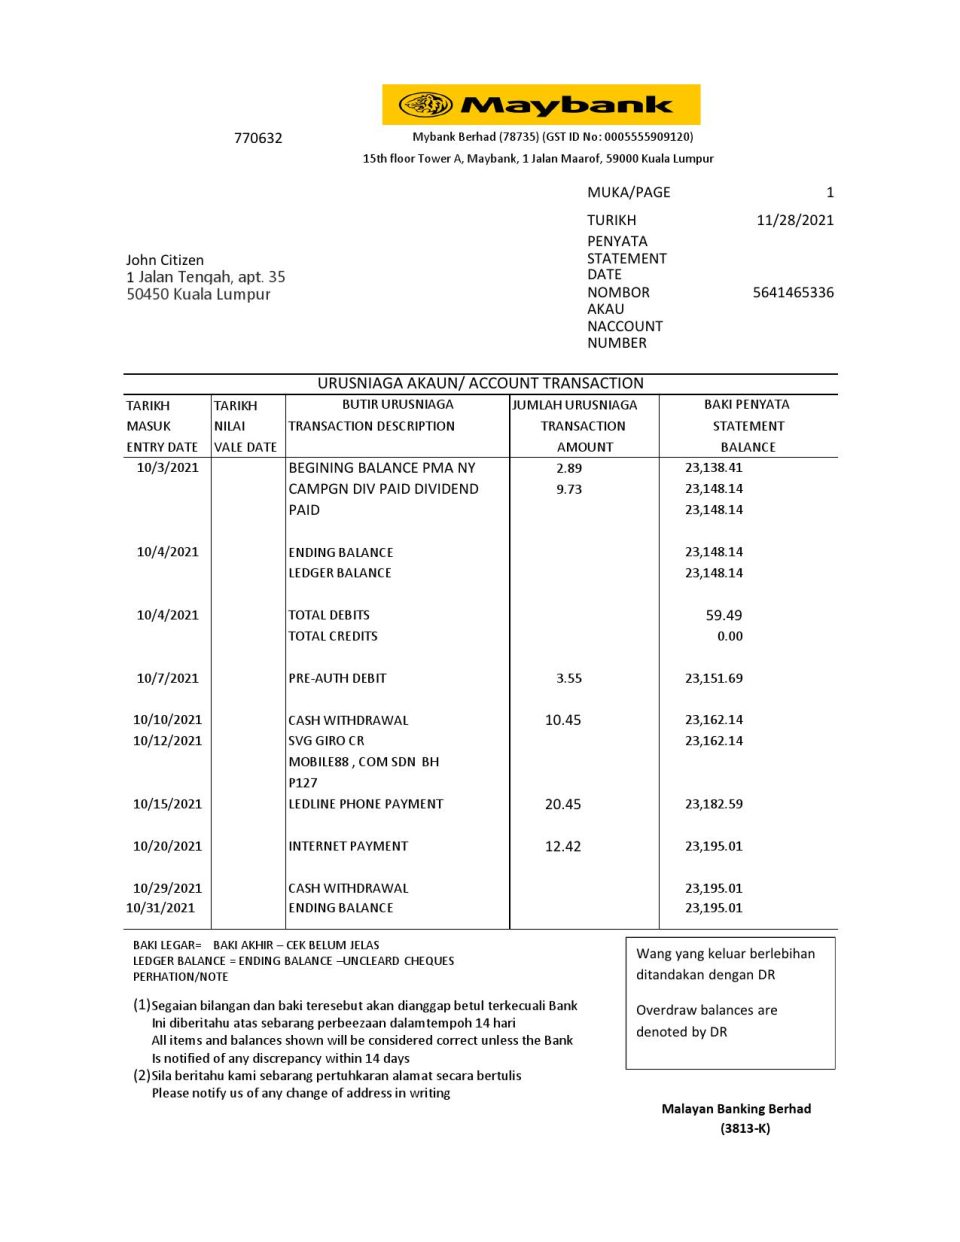 Malaysia Maybank bank statement easy to fill template in .xls and .pdf file format